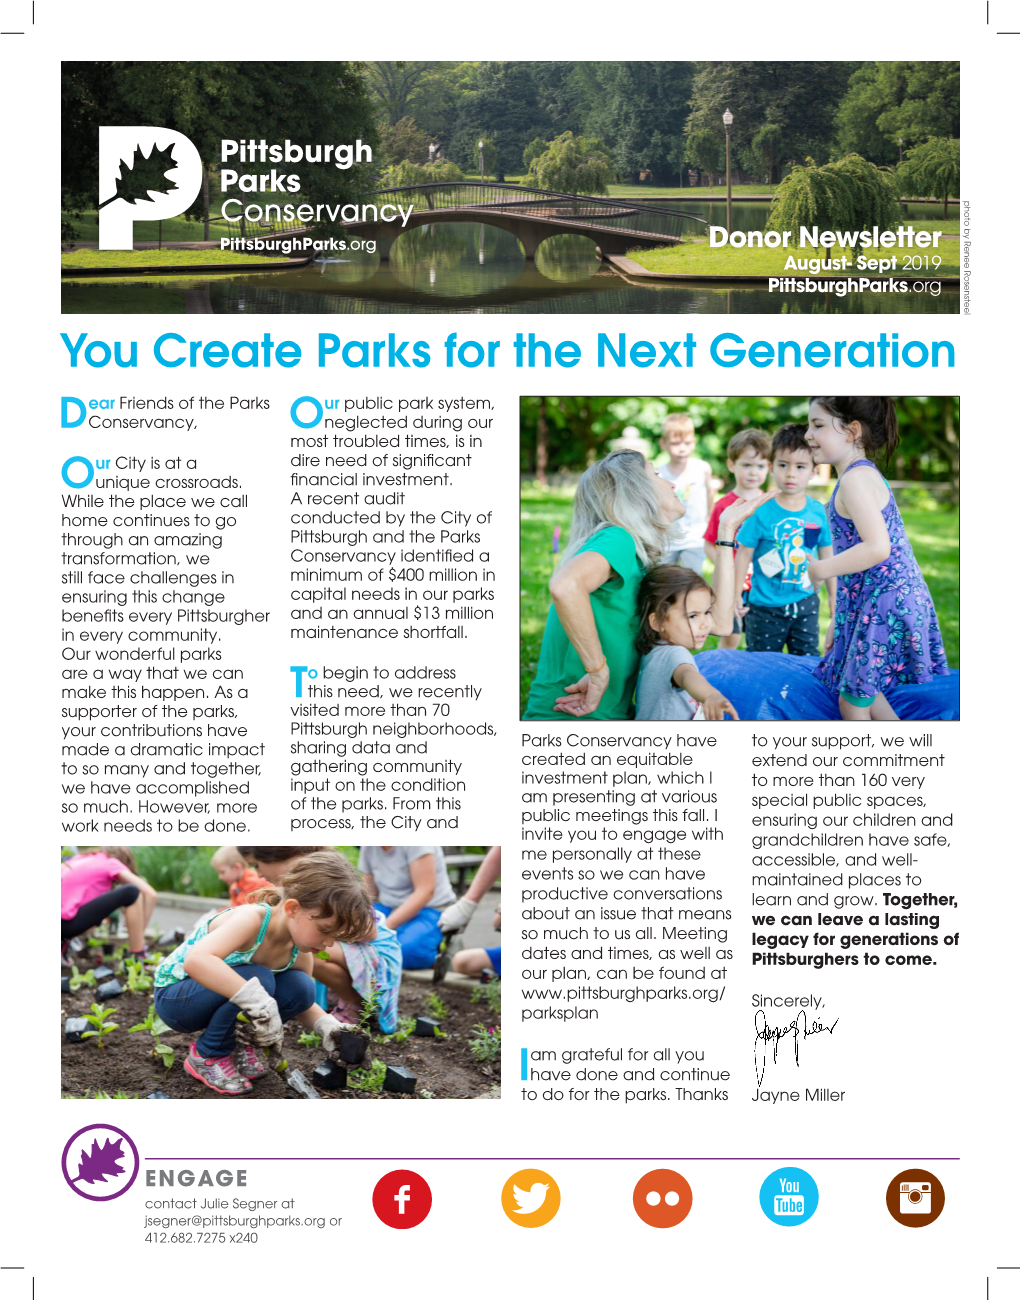 You Create Parks for the Next Generation